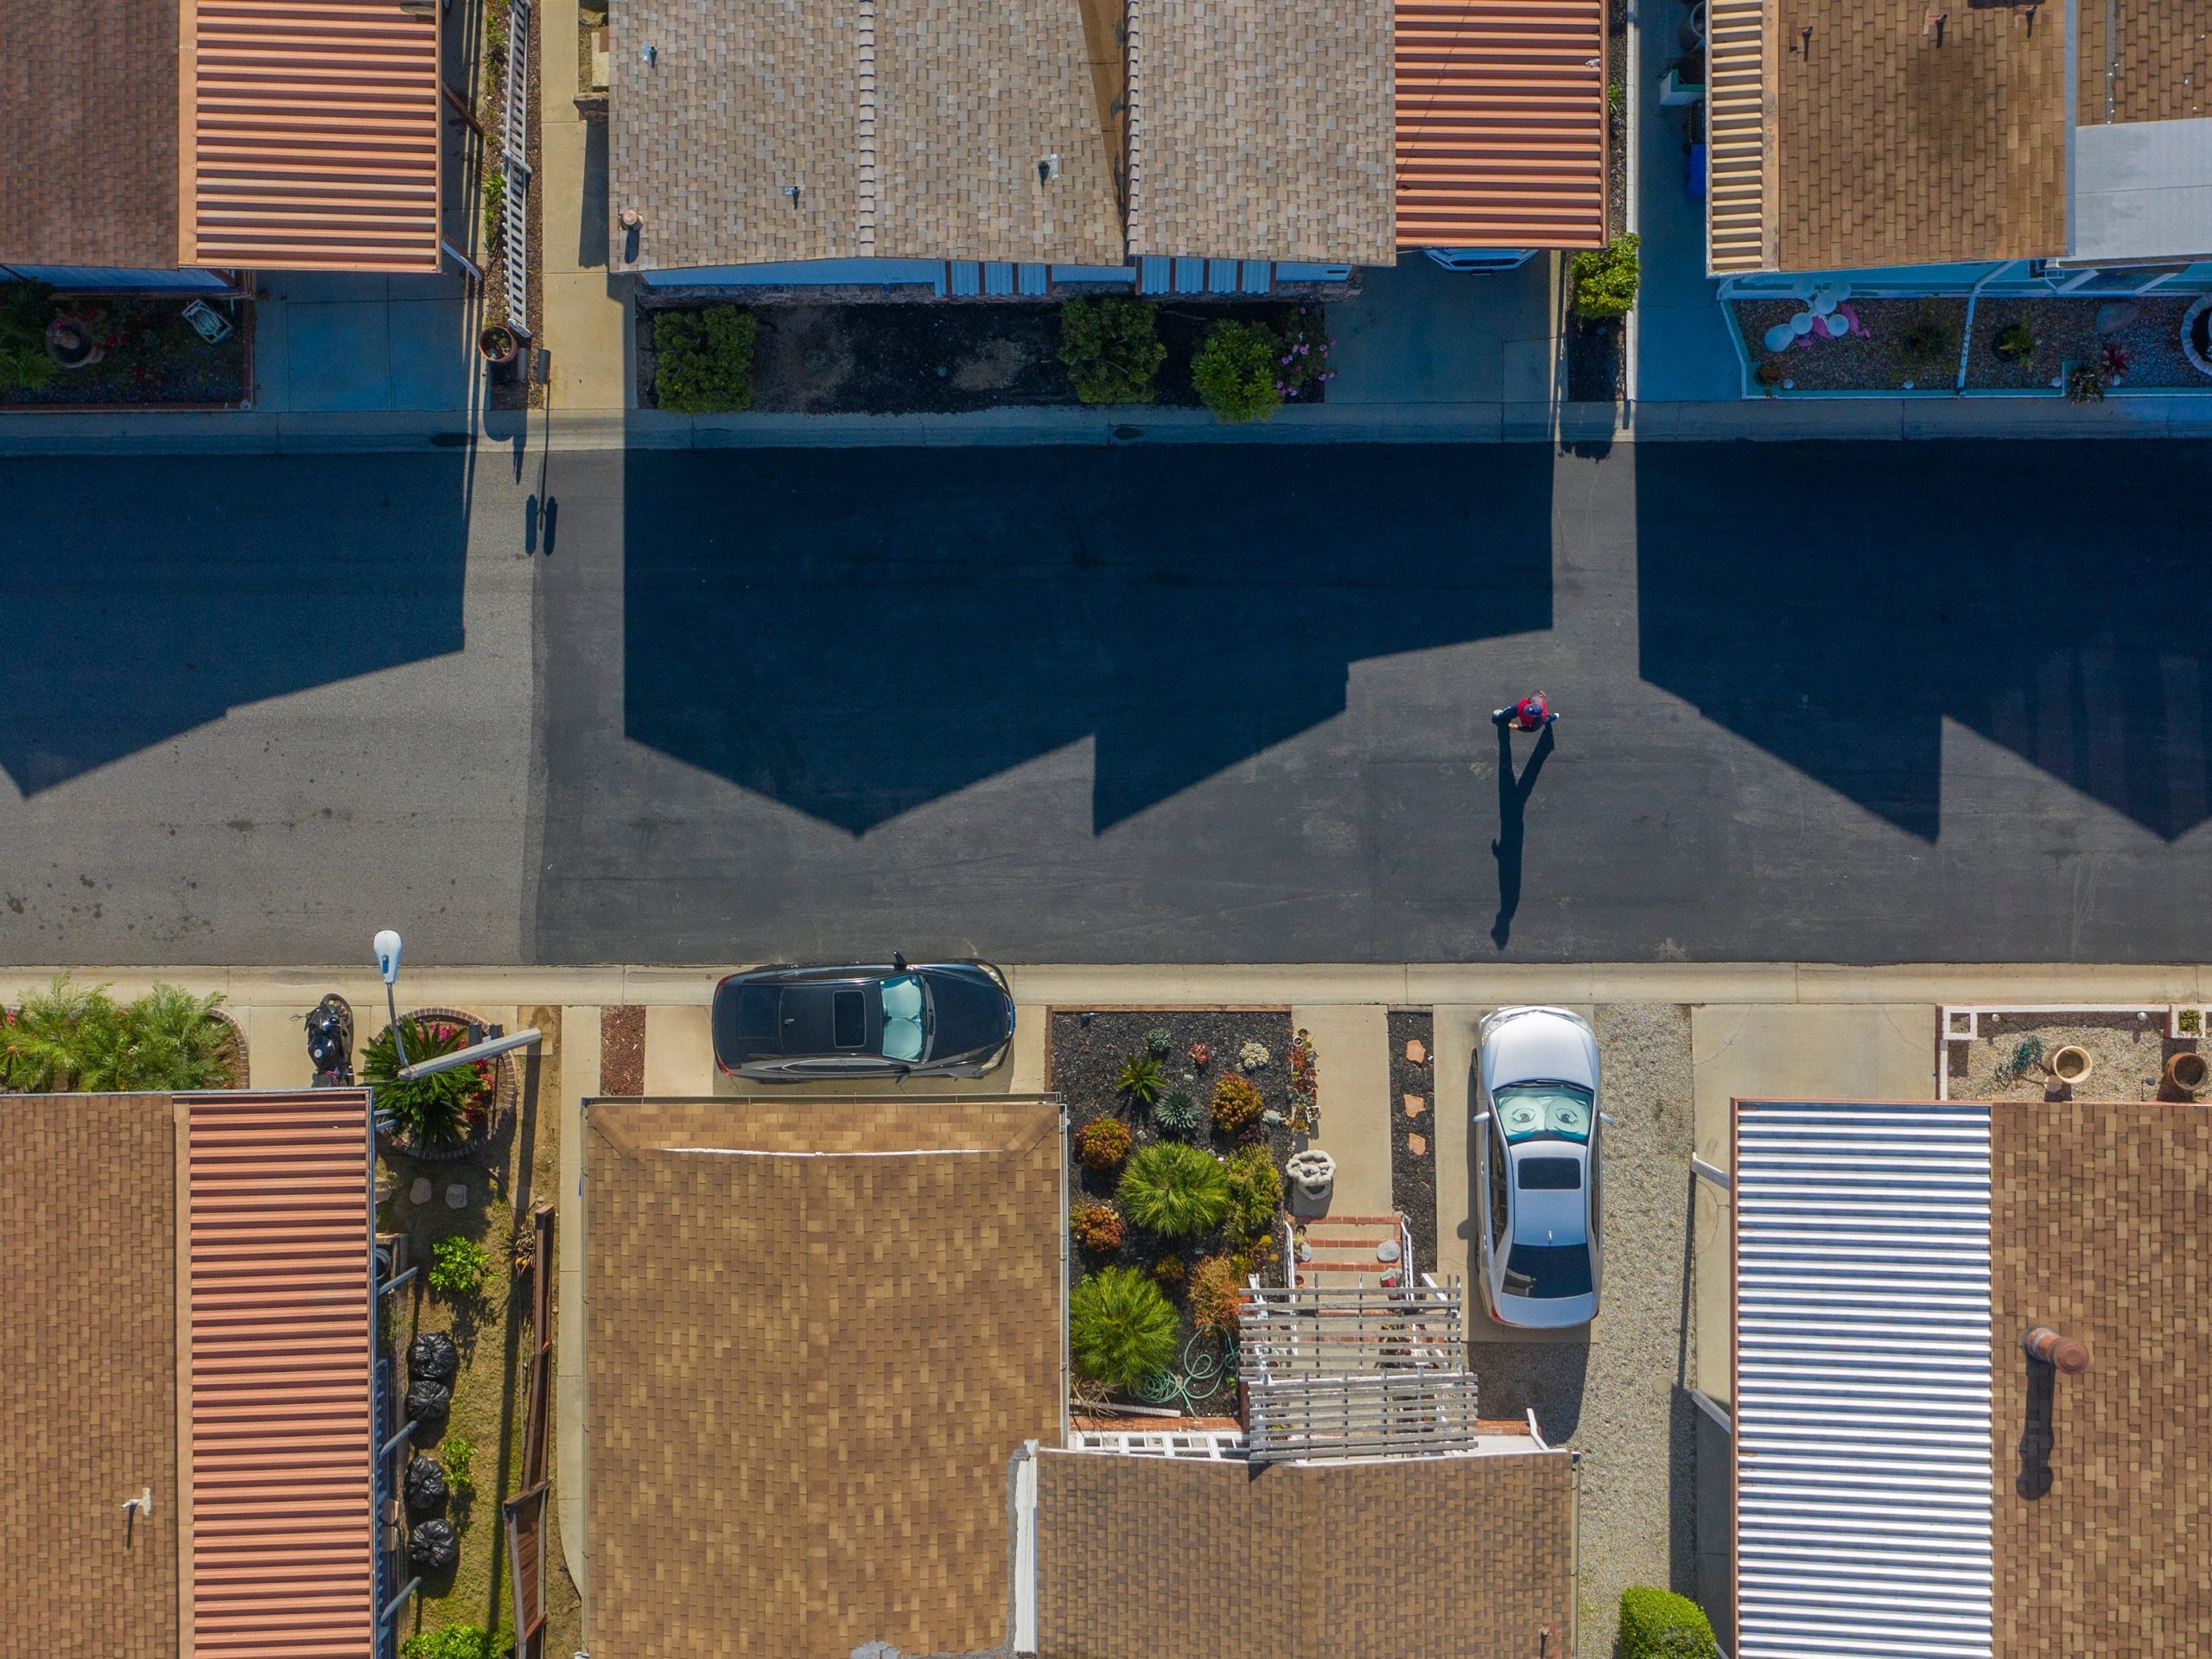 COMPTON, CALIFORNIA - APRIL 26: An aerial view shows a pedestrian on a quiet neighborhood street as residents continue to stay at home to fight the coronavirus pandemic on April 26, 2020 in the East Rancho Dominguez section of Compton, California on April 26, 2020. Los Angeles County has extend its stay-at-home order through at least May 15 and warned that restrictions could be extended into the summer. Officials have forecast that up to 30 percent of LA County residents could be infected by mid-summer without improvements to social distancing behavior. (Photo by David McNew/Getty Images)